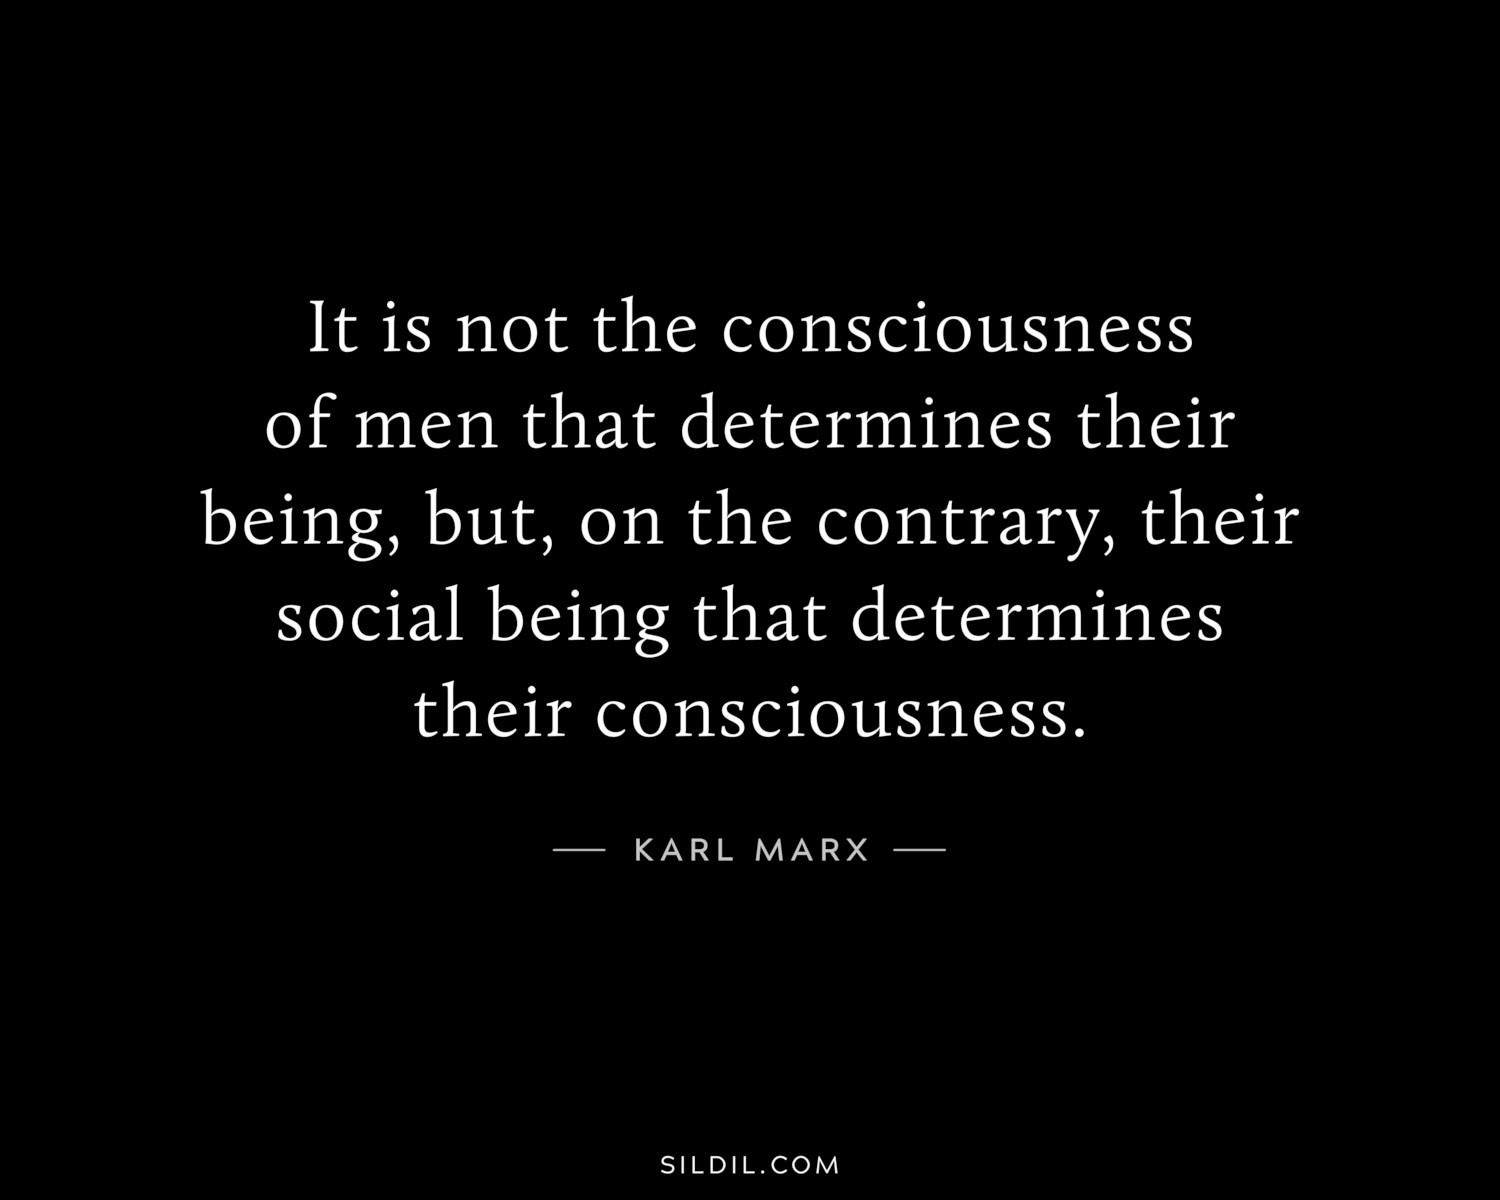 It is not the consciousness of men that determines their being, but, on the contrary, their social being that determines their consciousness.